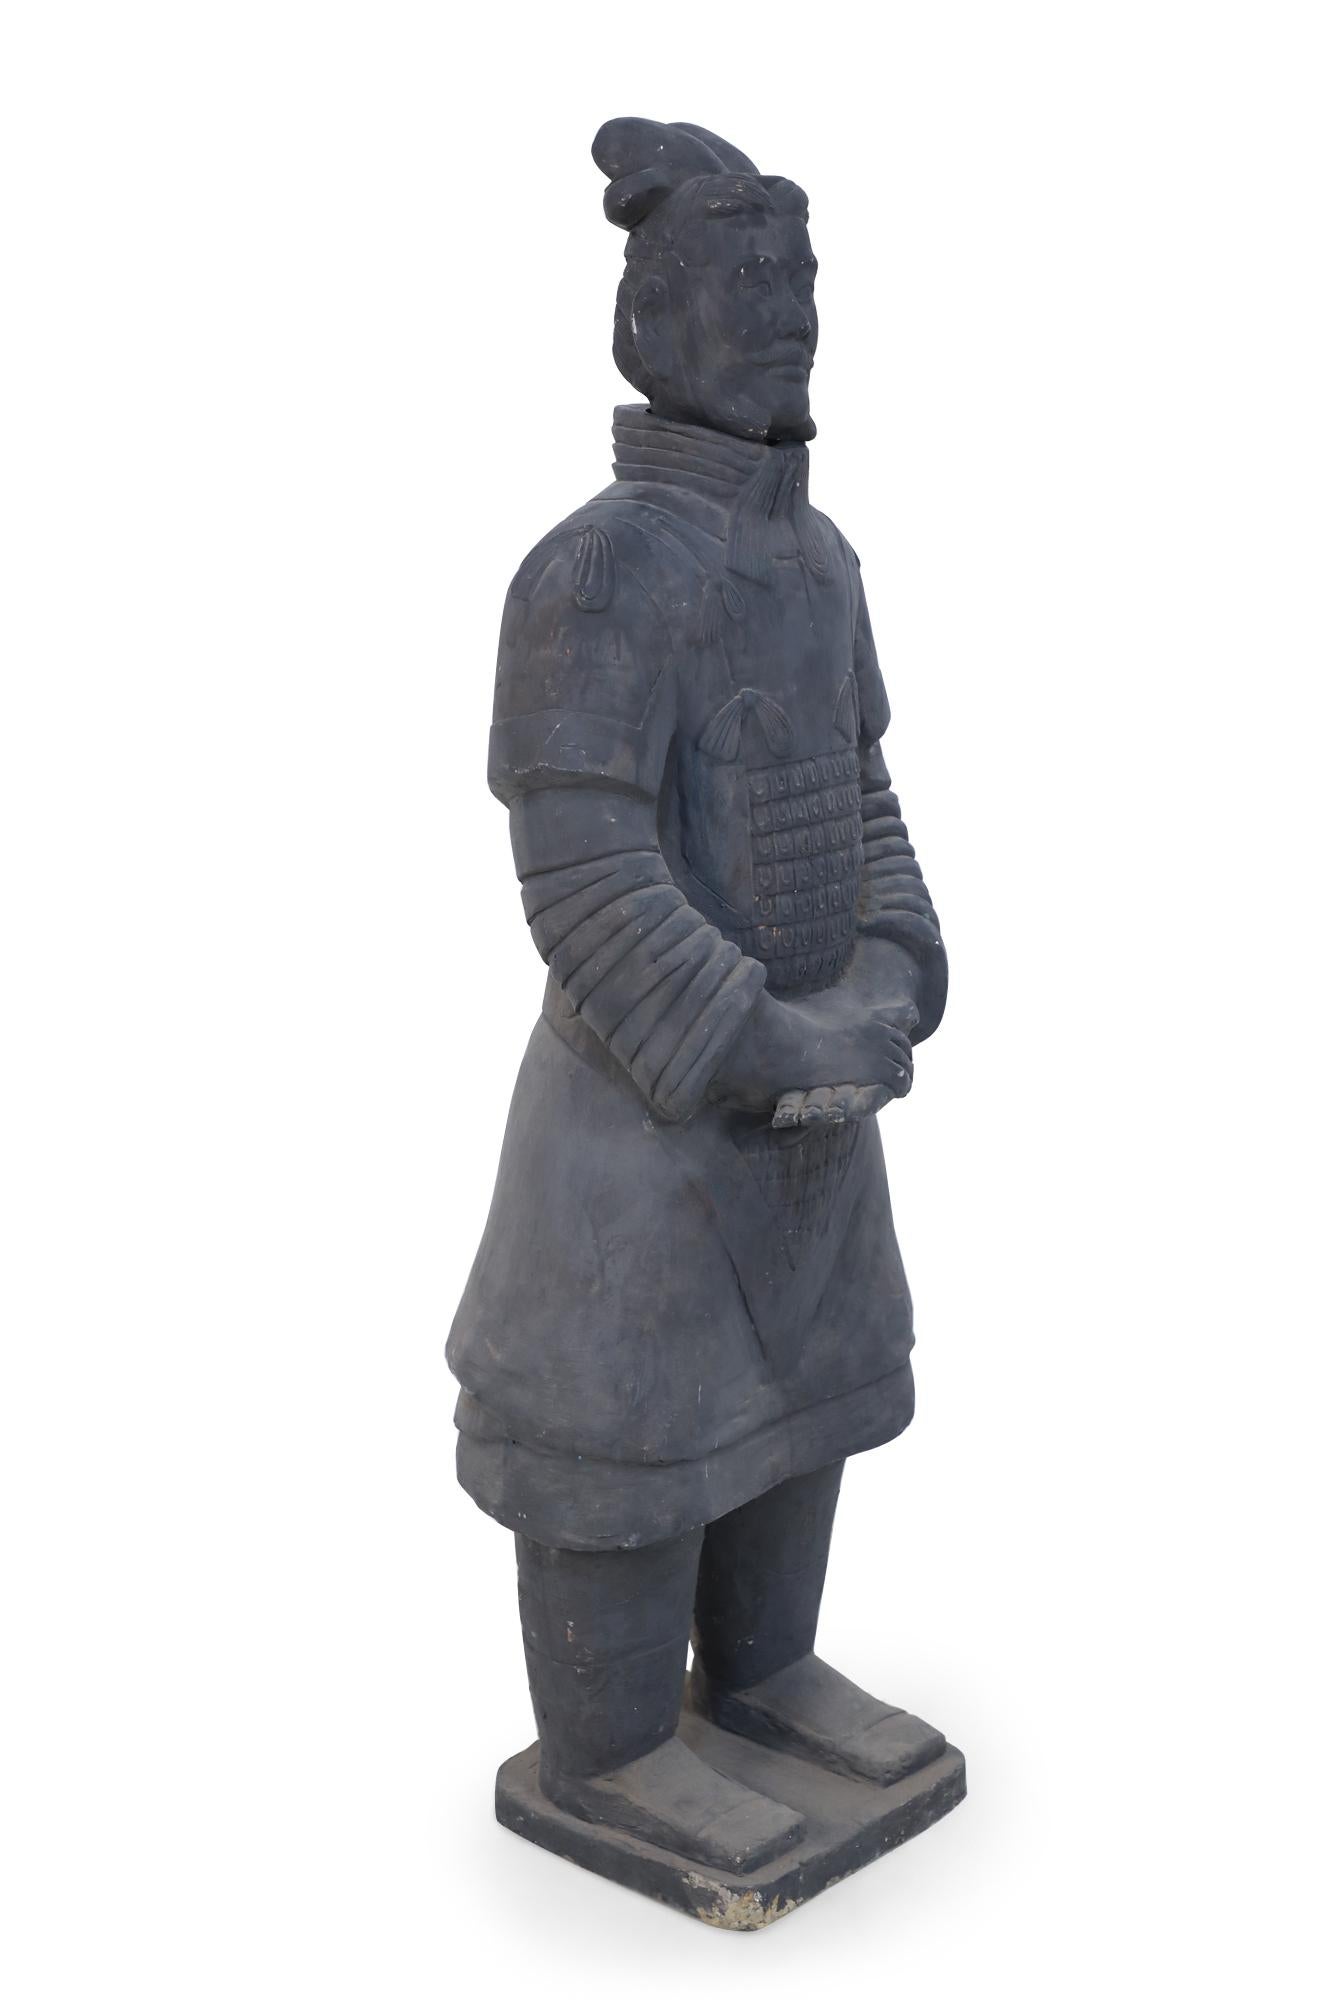 Chinese Qin Dynasty Style Life-Size Terracotta Soldier Statue 4